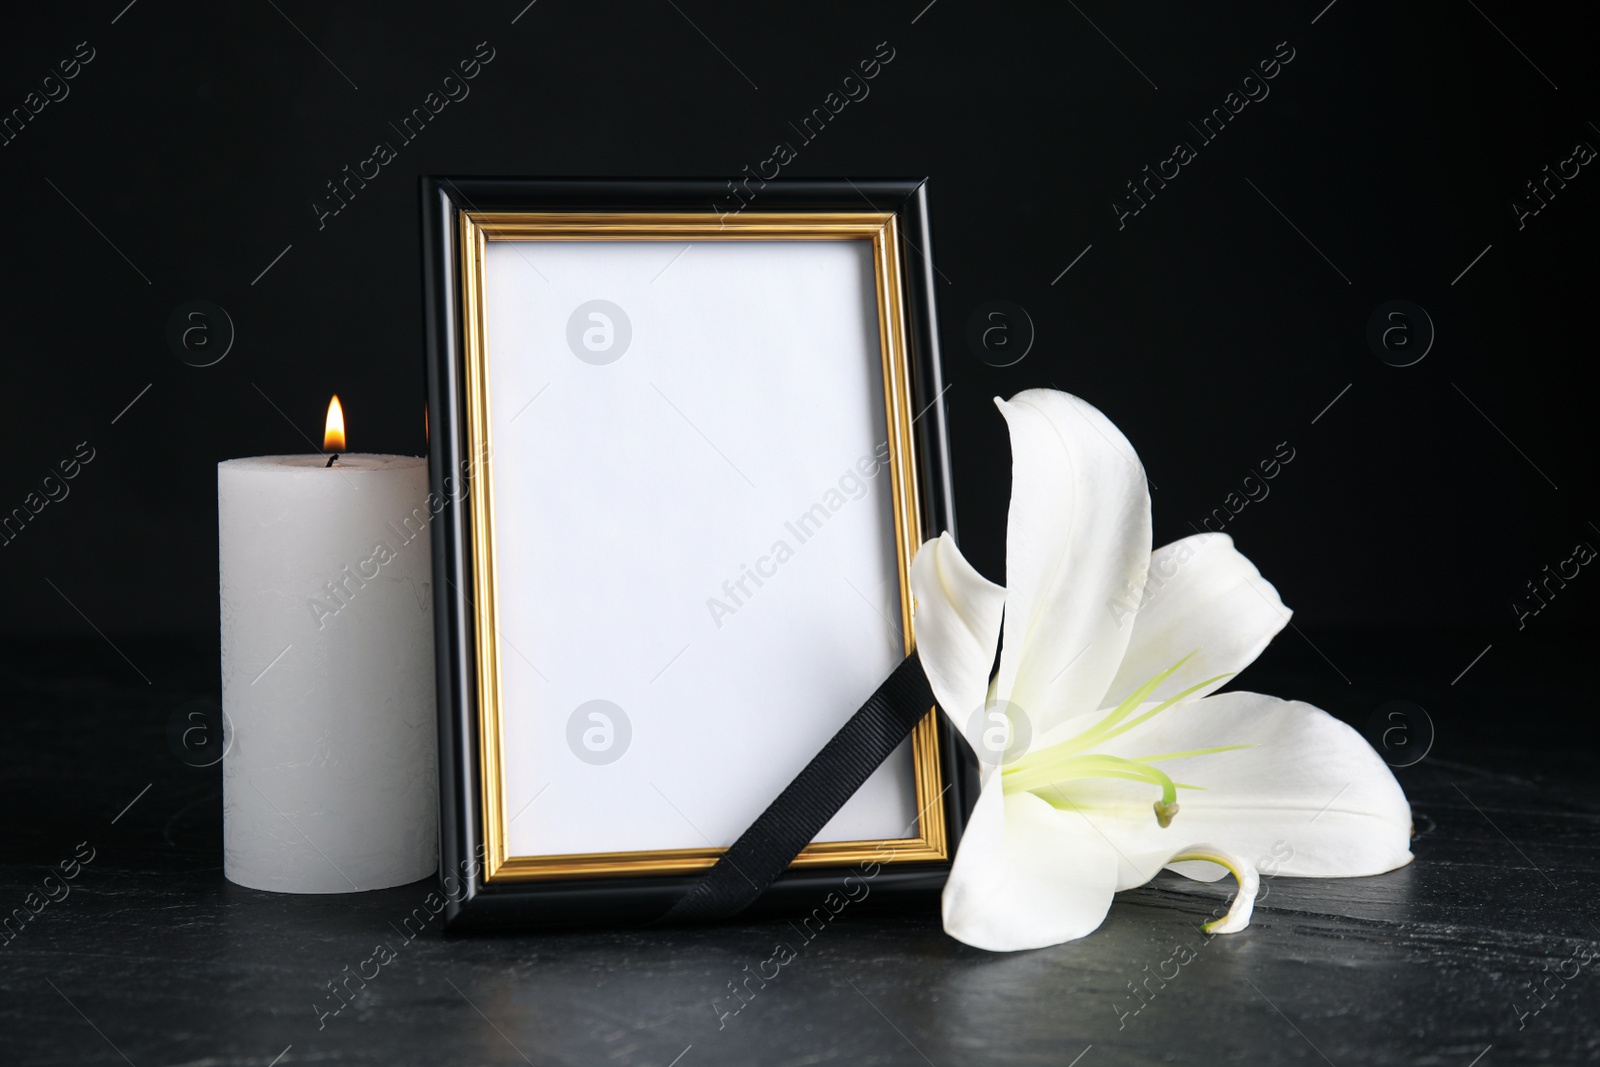 Photo of Funeral photo frame with ribbon, white lily and candle on black table against dark background. Space for design